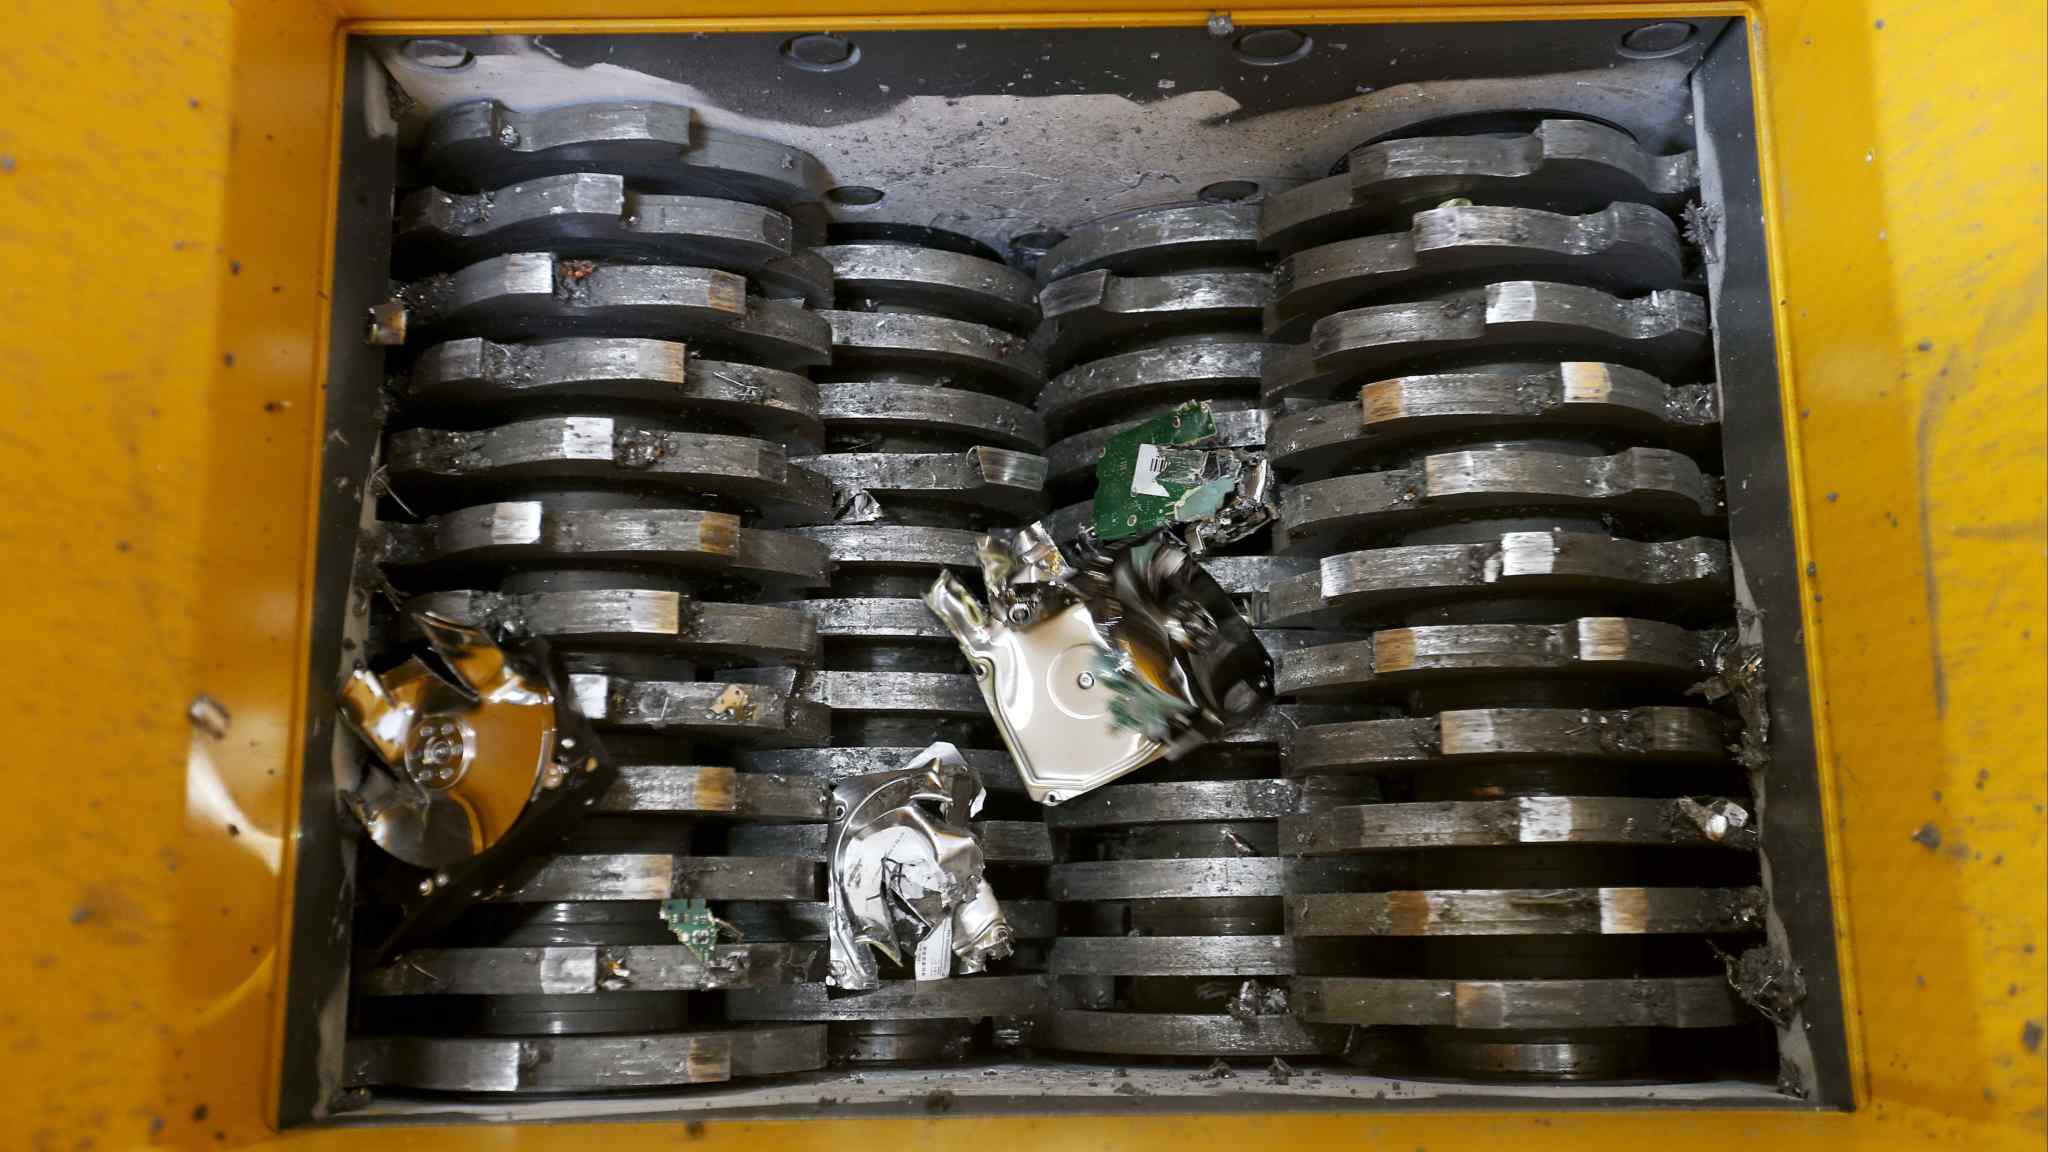 Why Big Tech shreds millions of storage devices it could reuse